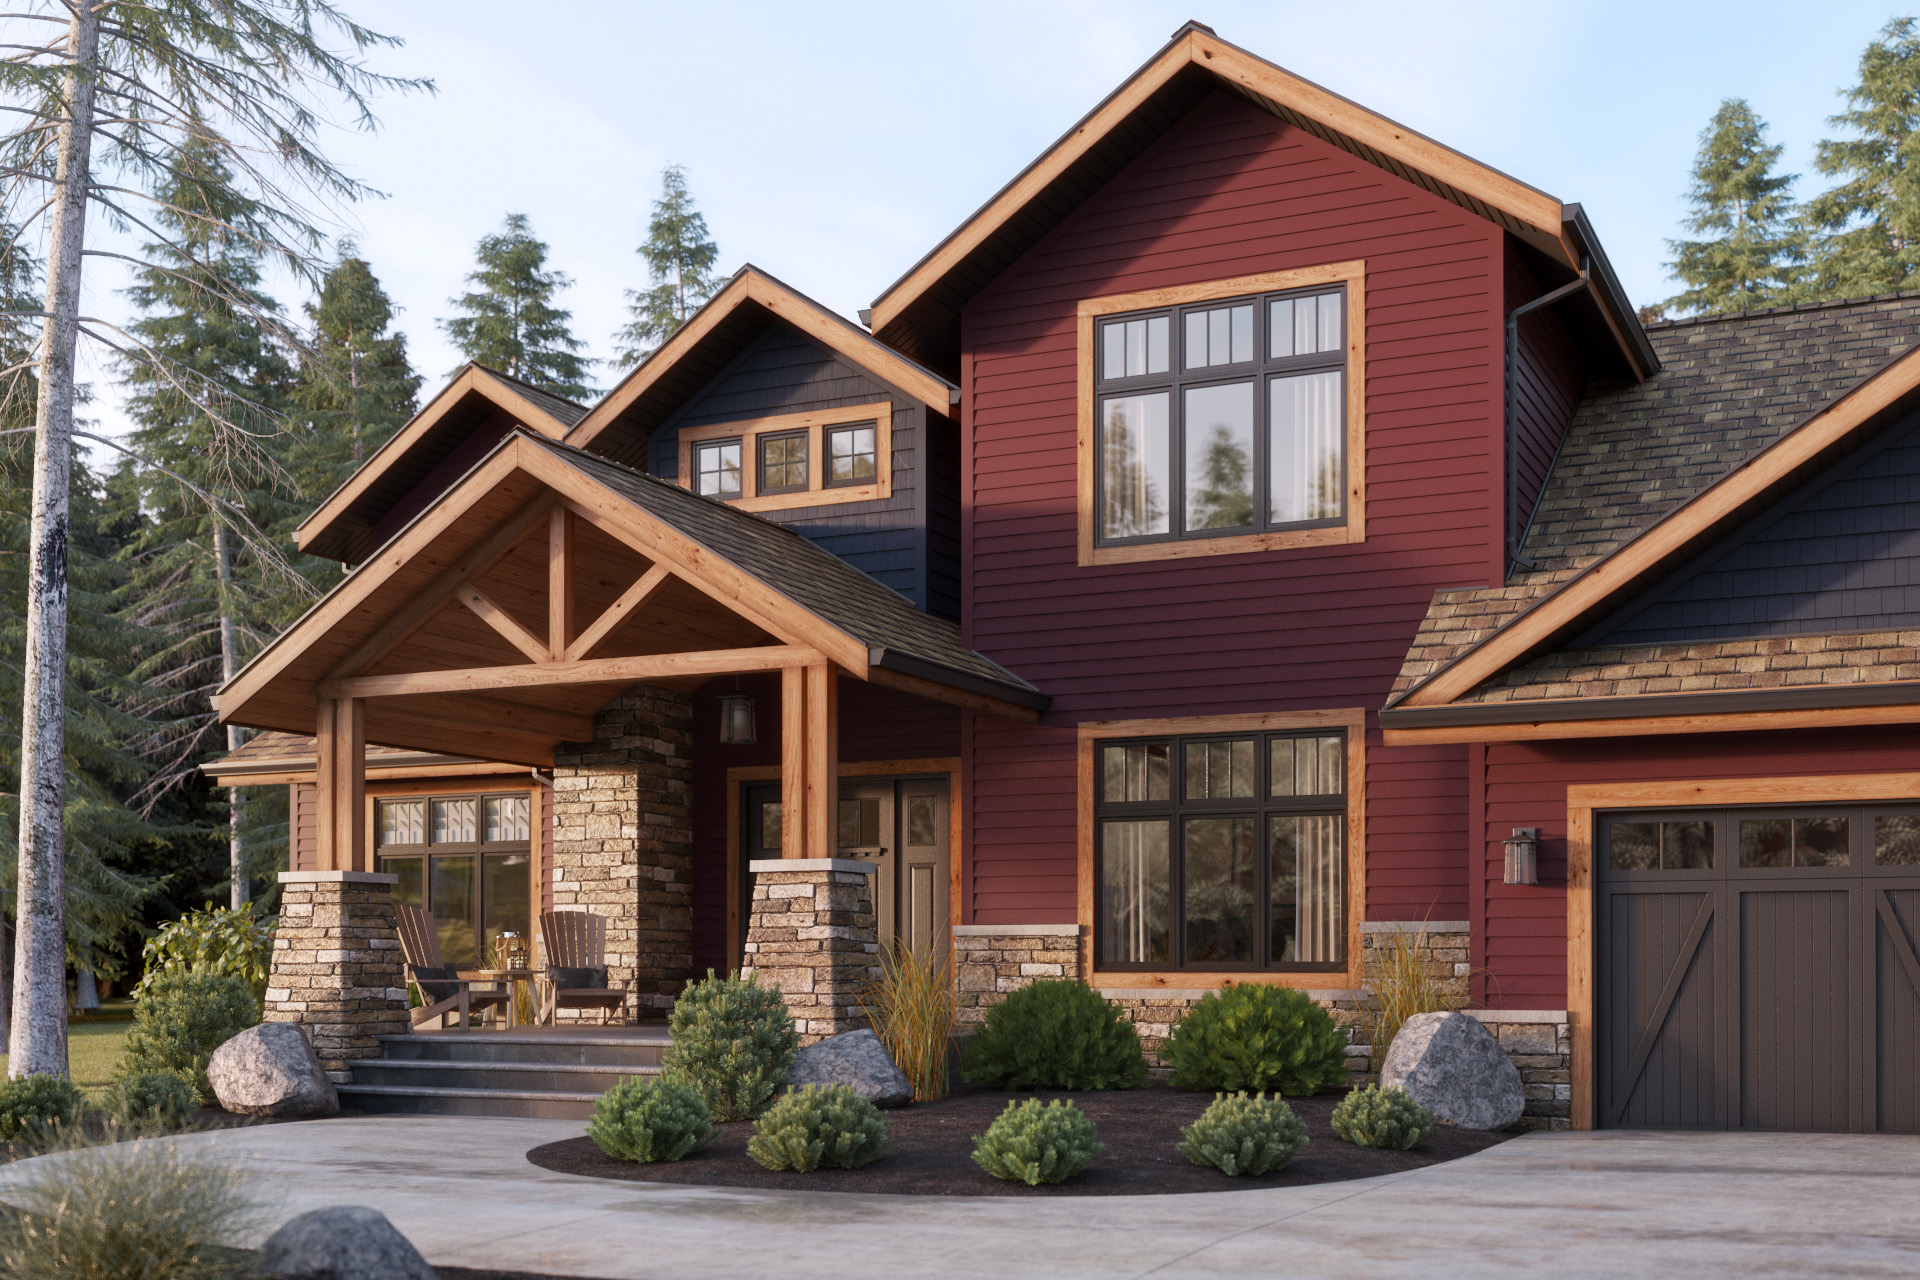 Rustic two story home with red siding and stone accents.